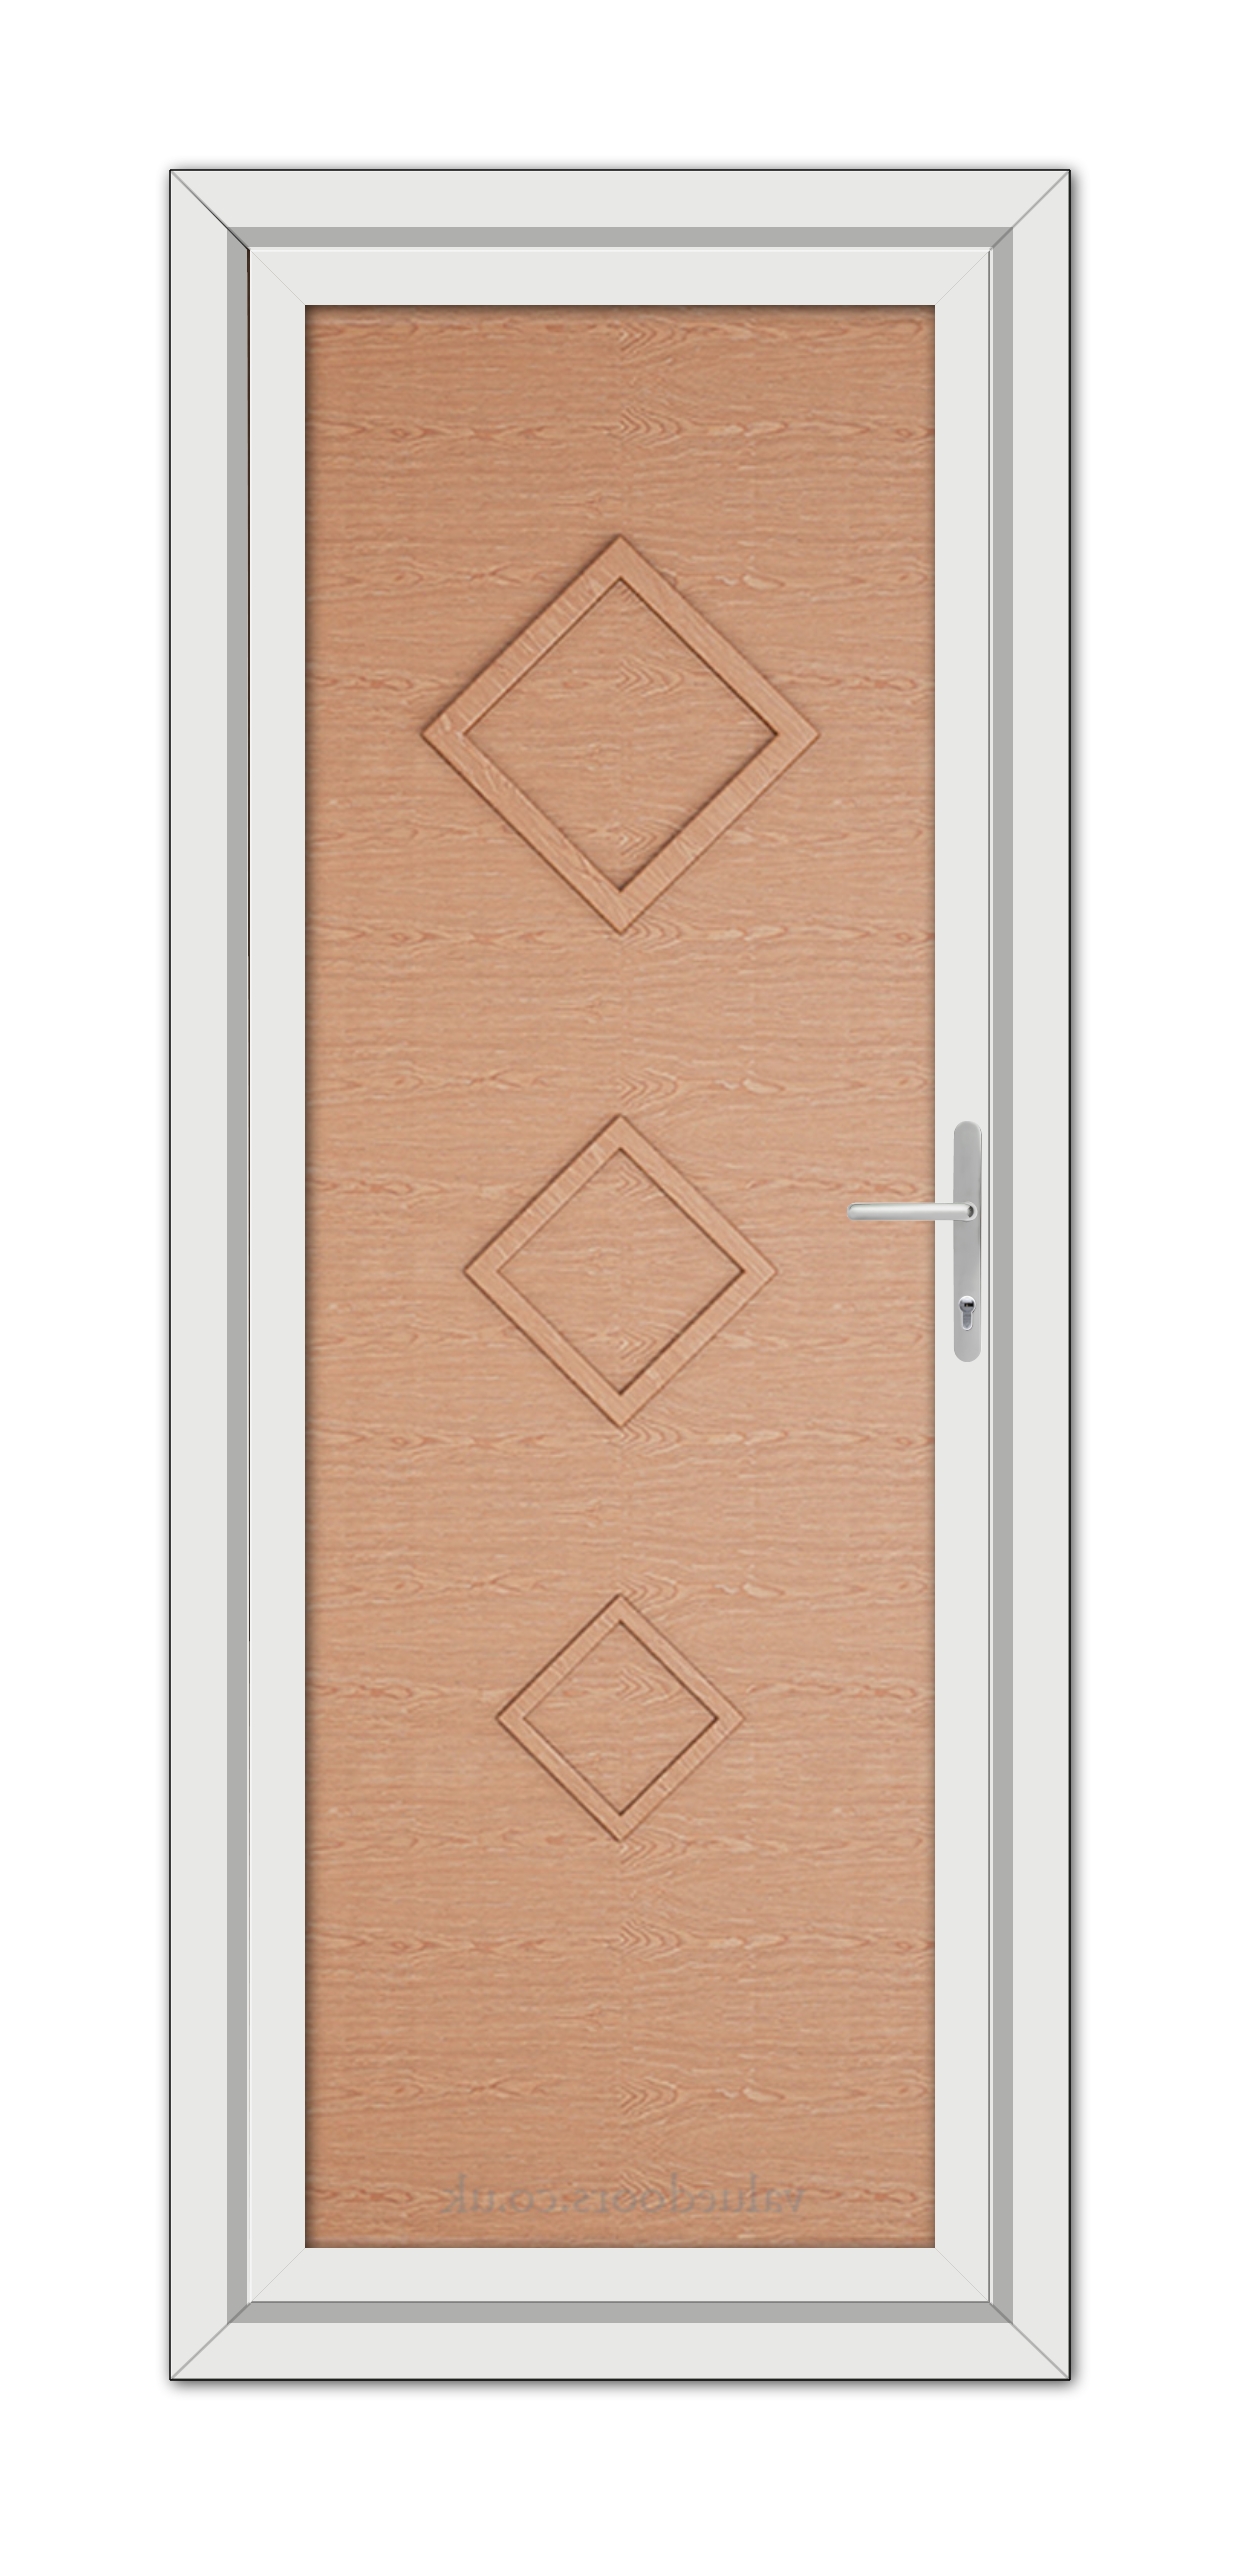 A vertical image of an Irish Oak Modern 5123 Solid uPVC Door with a white frame, featuring three diamond-shaped panels and a metal handle on the right side.